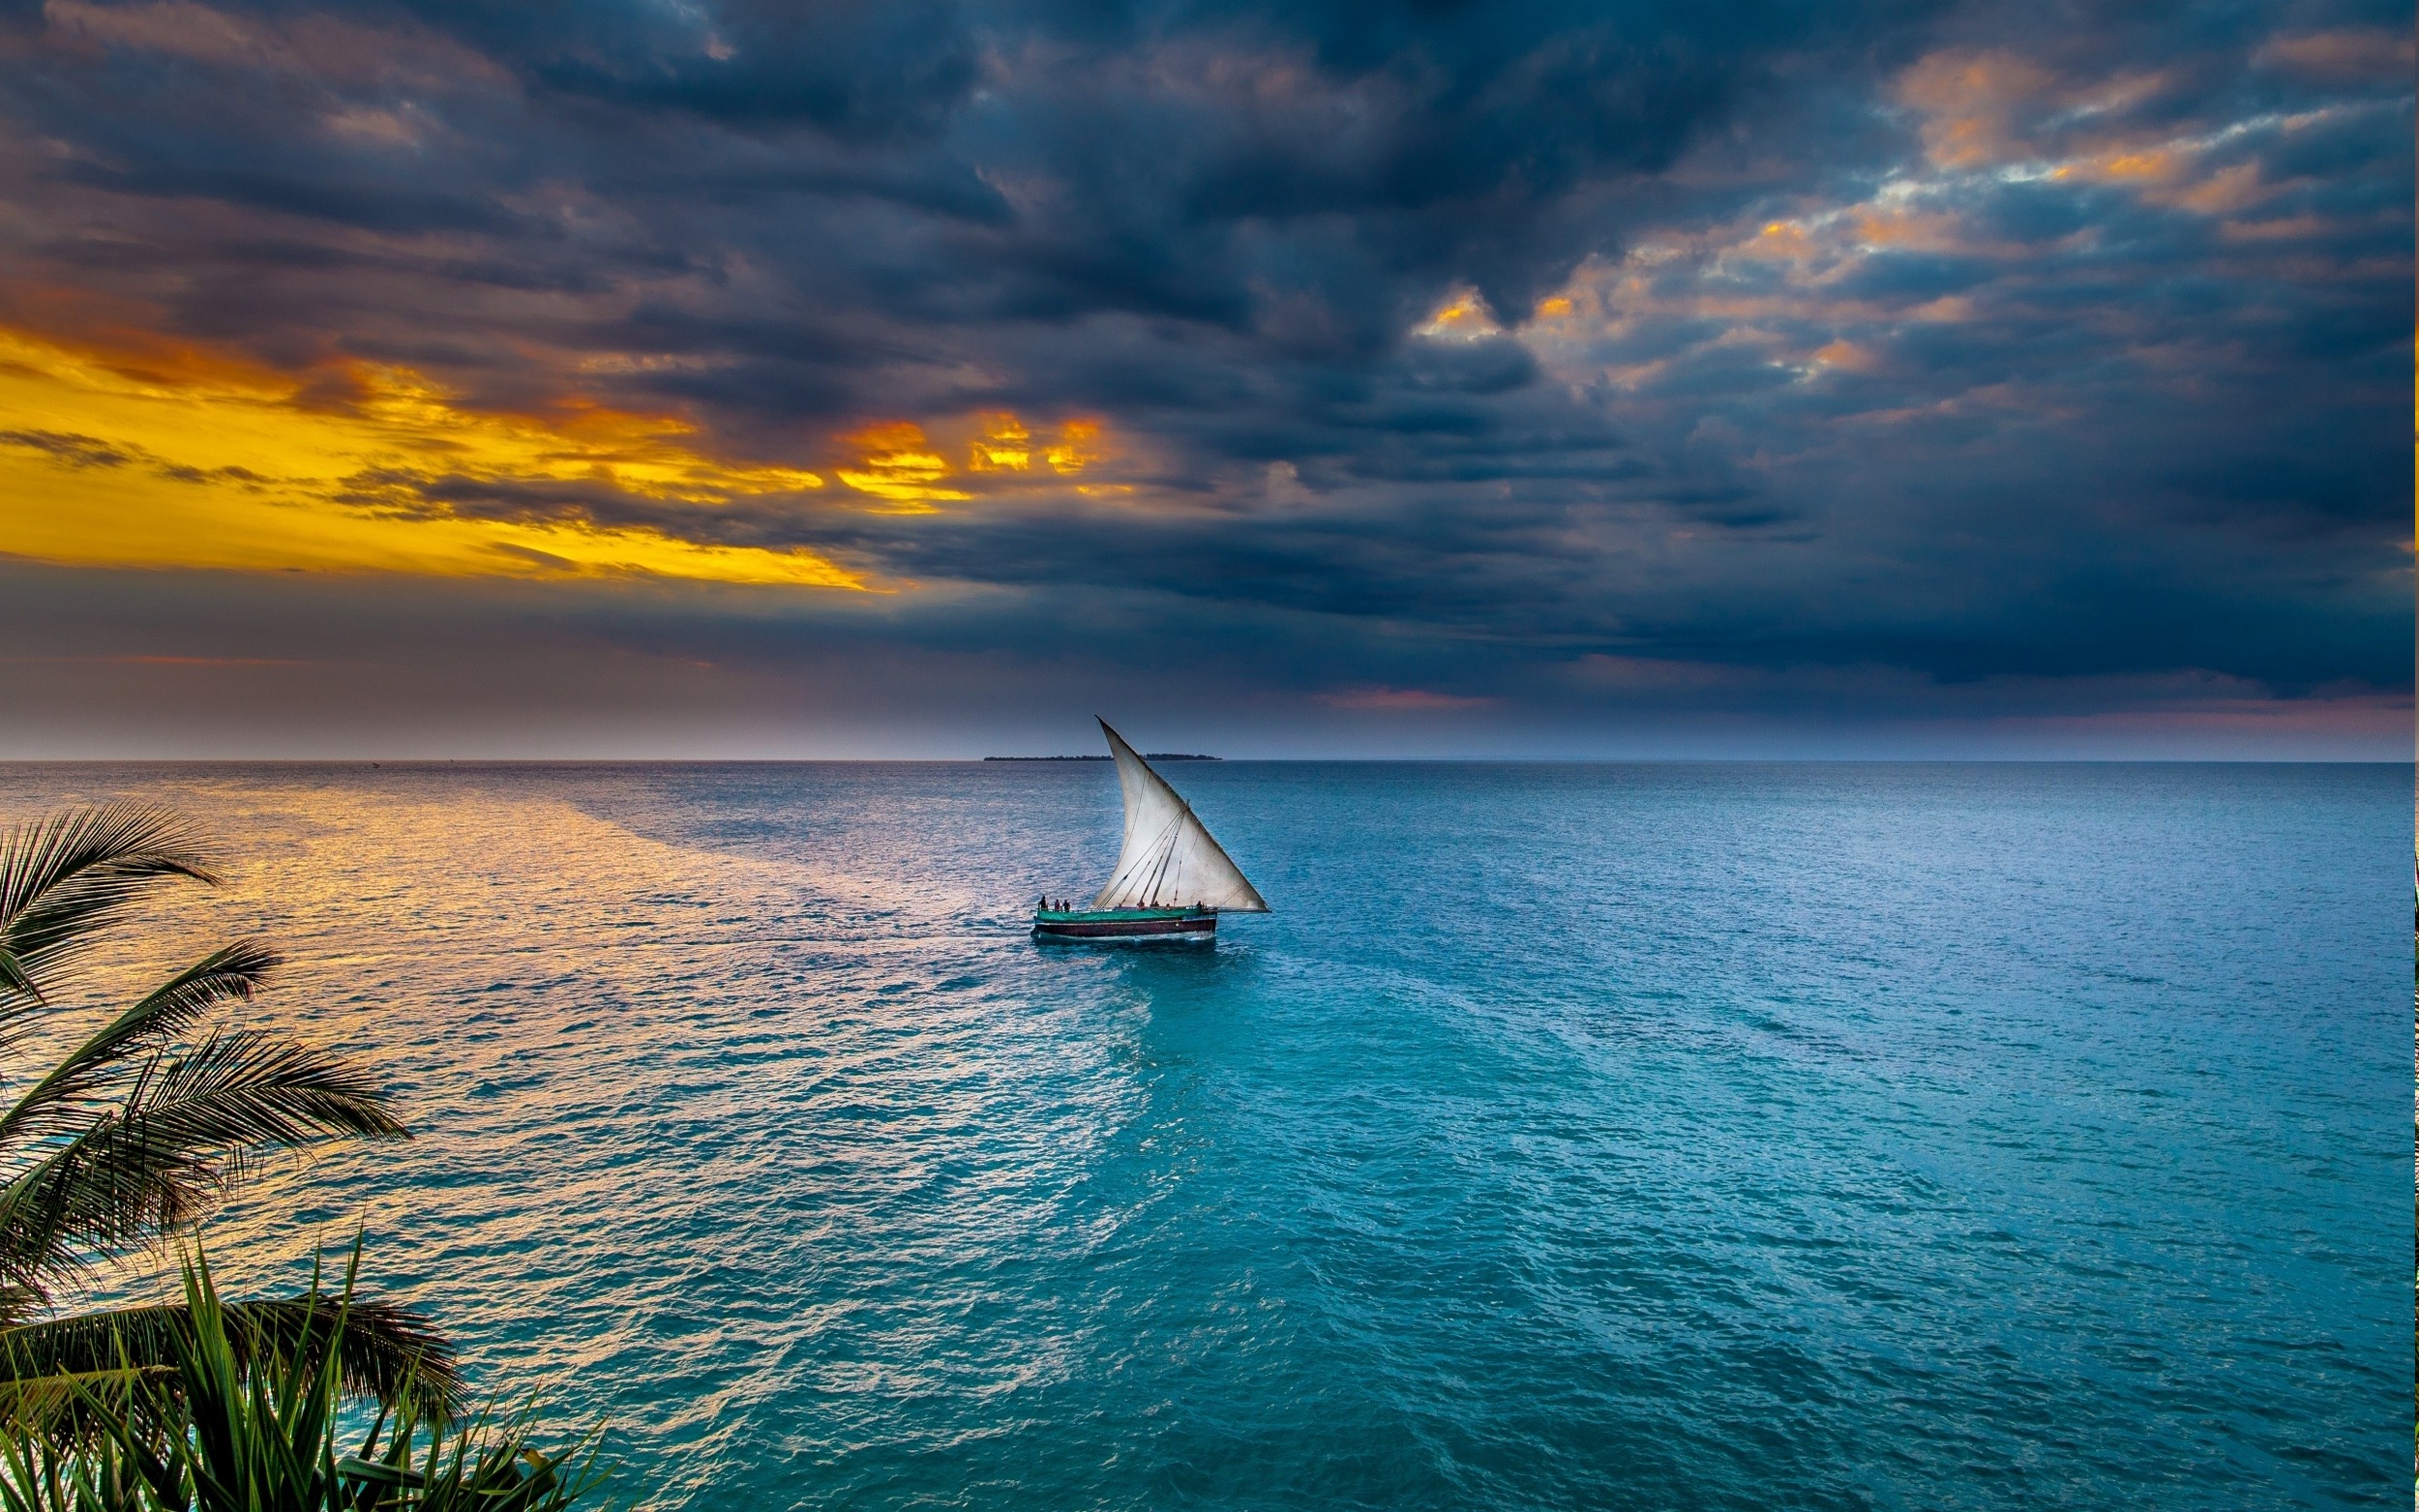 sunset, Sea, Sky, Sailing Ships, Nature, Landscape, Water, Tropical, Clouds, Africa Wallpaper